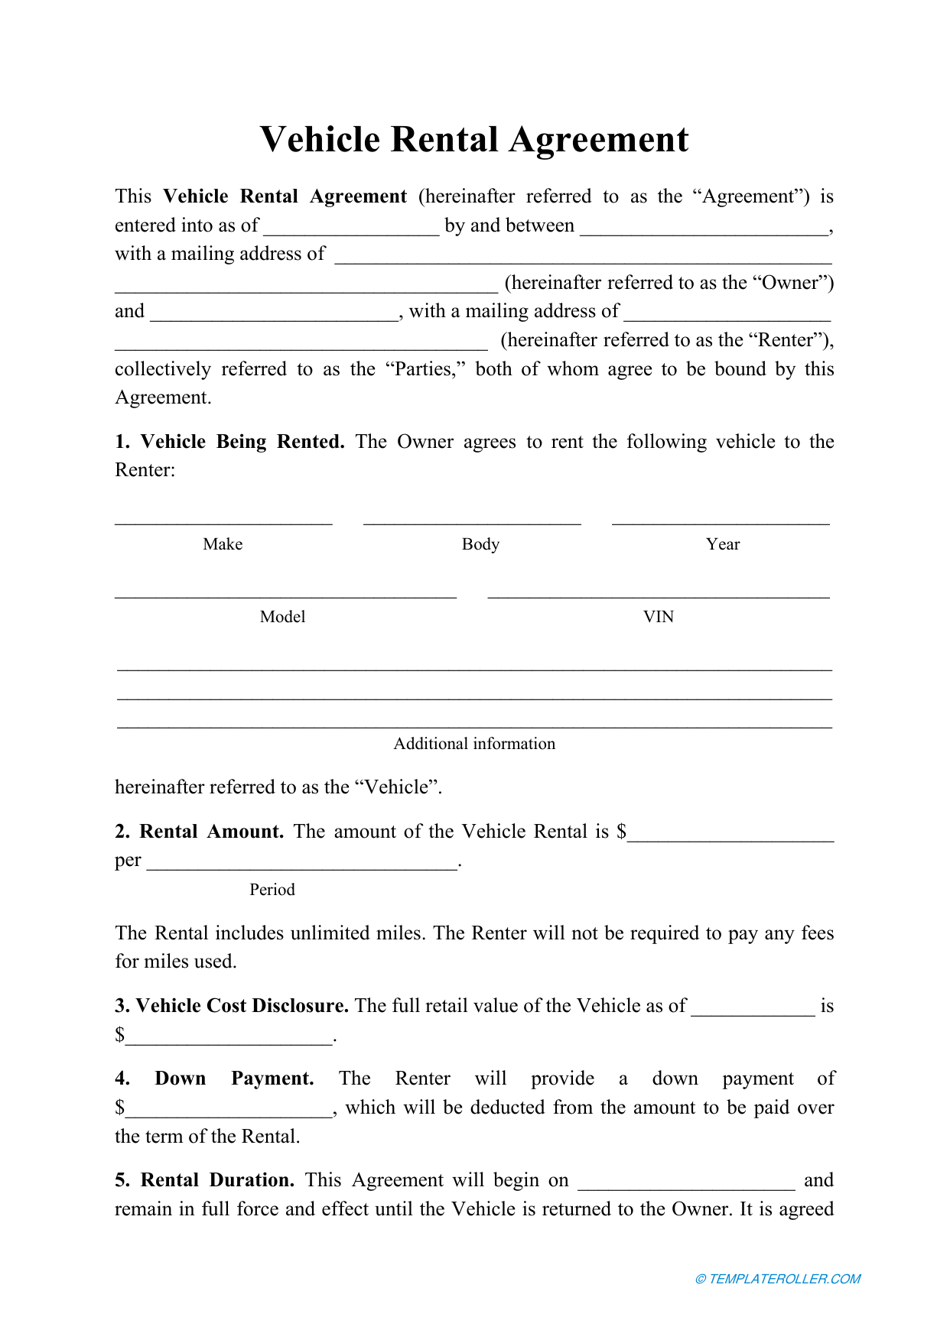 Vehicle Rental Agreement Template Fill Out, Sign Online and Download